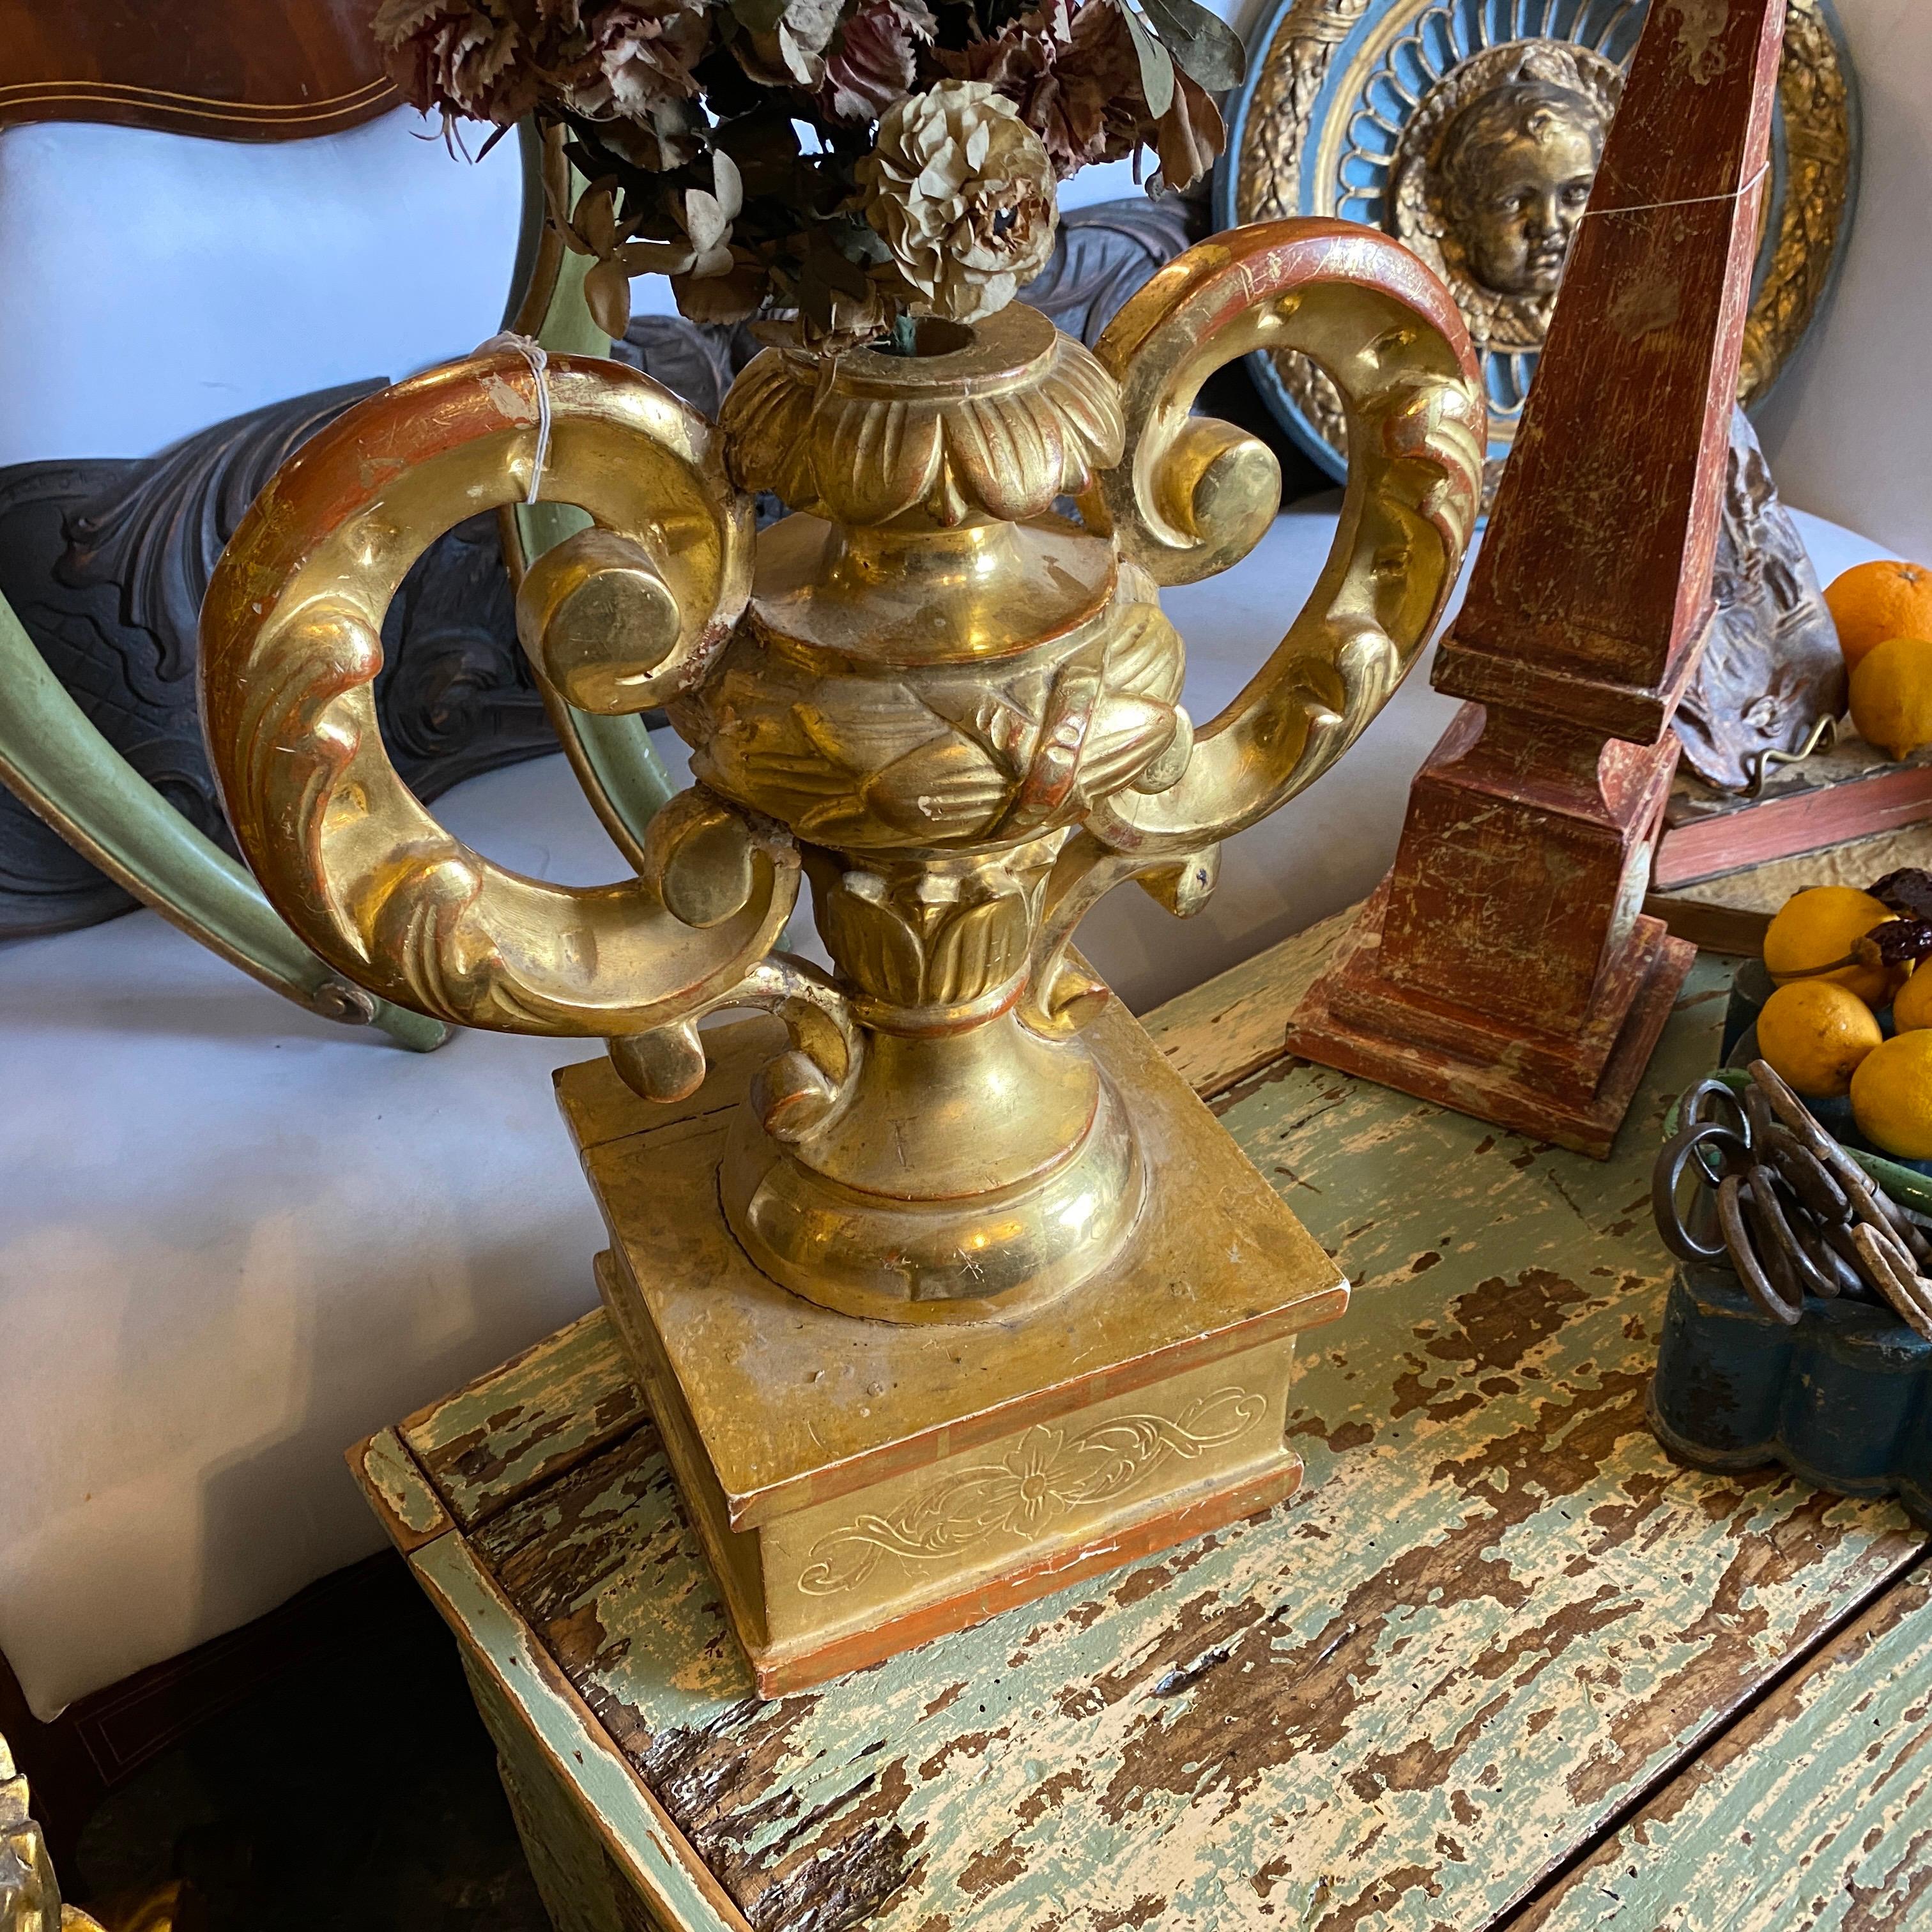 A 19th century antique gilded wood torchere on a base, also the floral arrangement is an original one. It's in good conditions considering age and use.